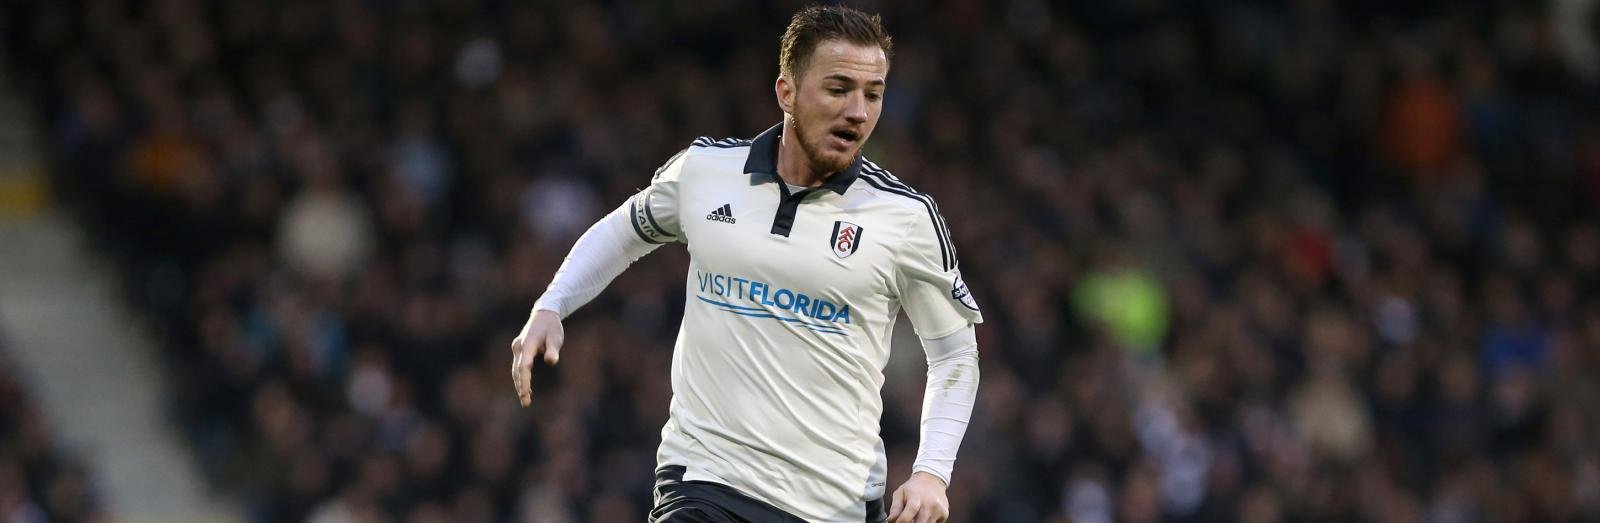 Aston Villa complete £12m signing of Fulham forward Ross McCormack